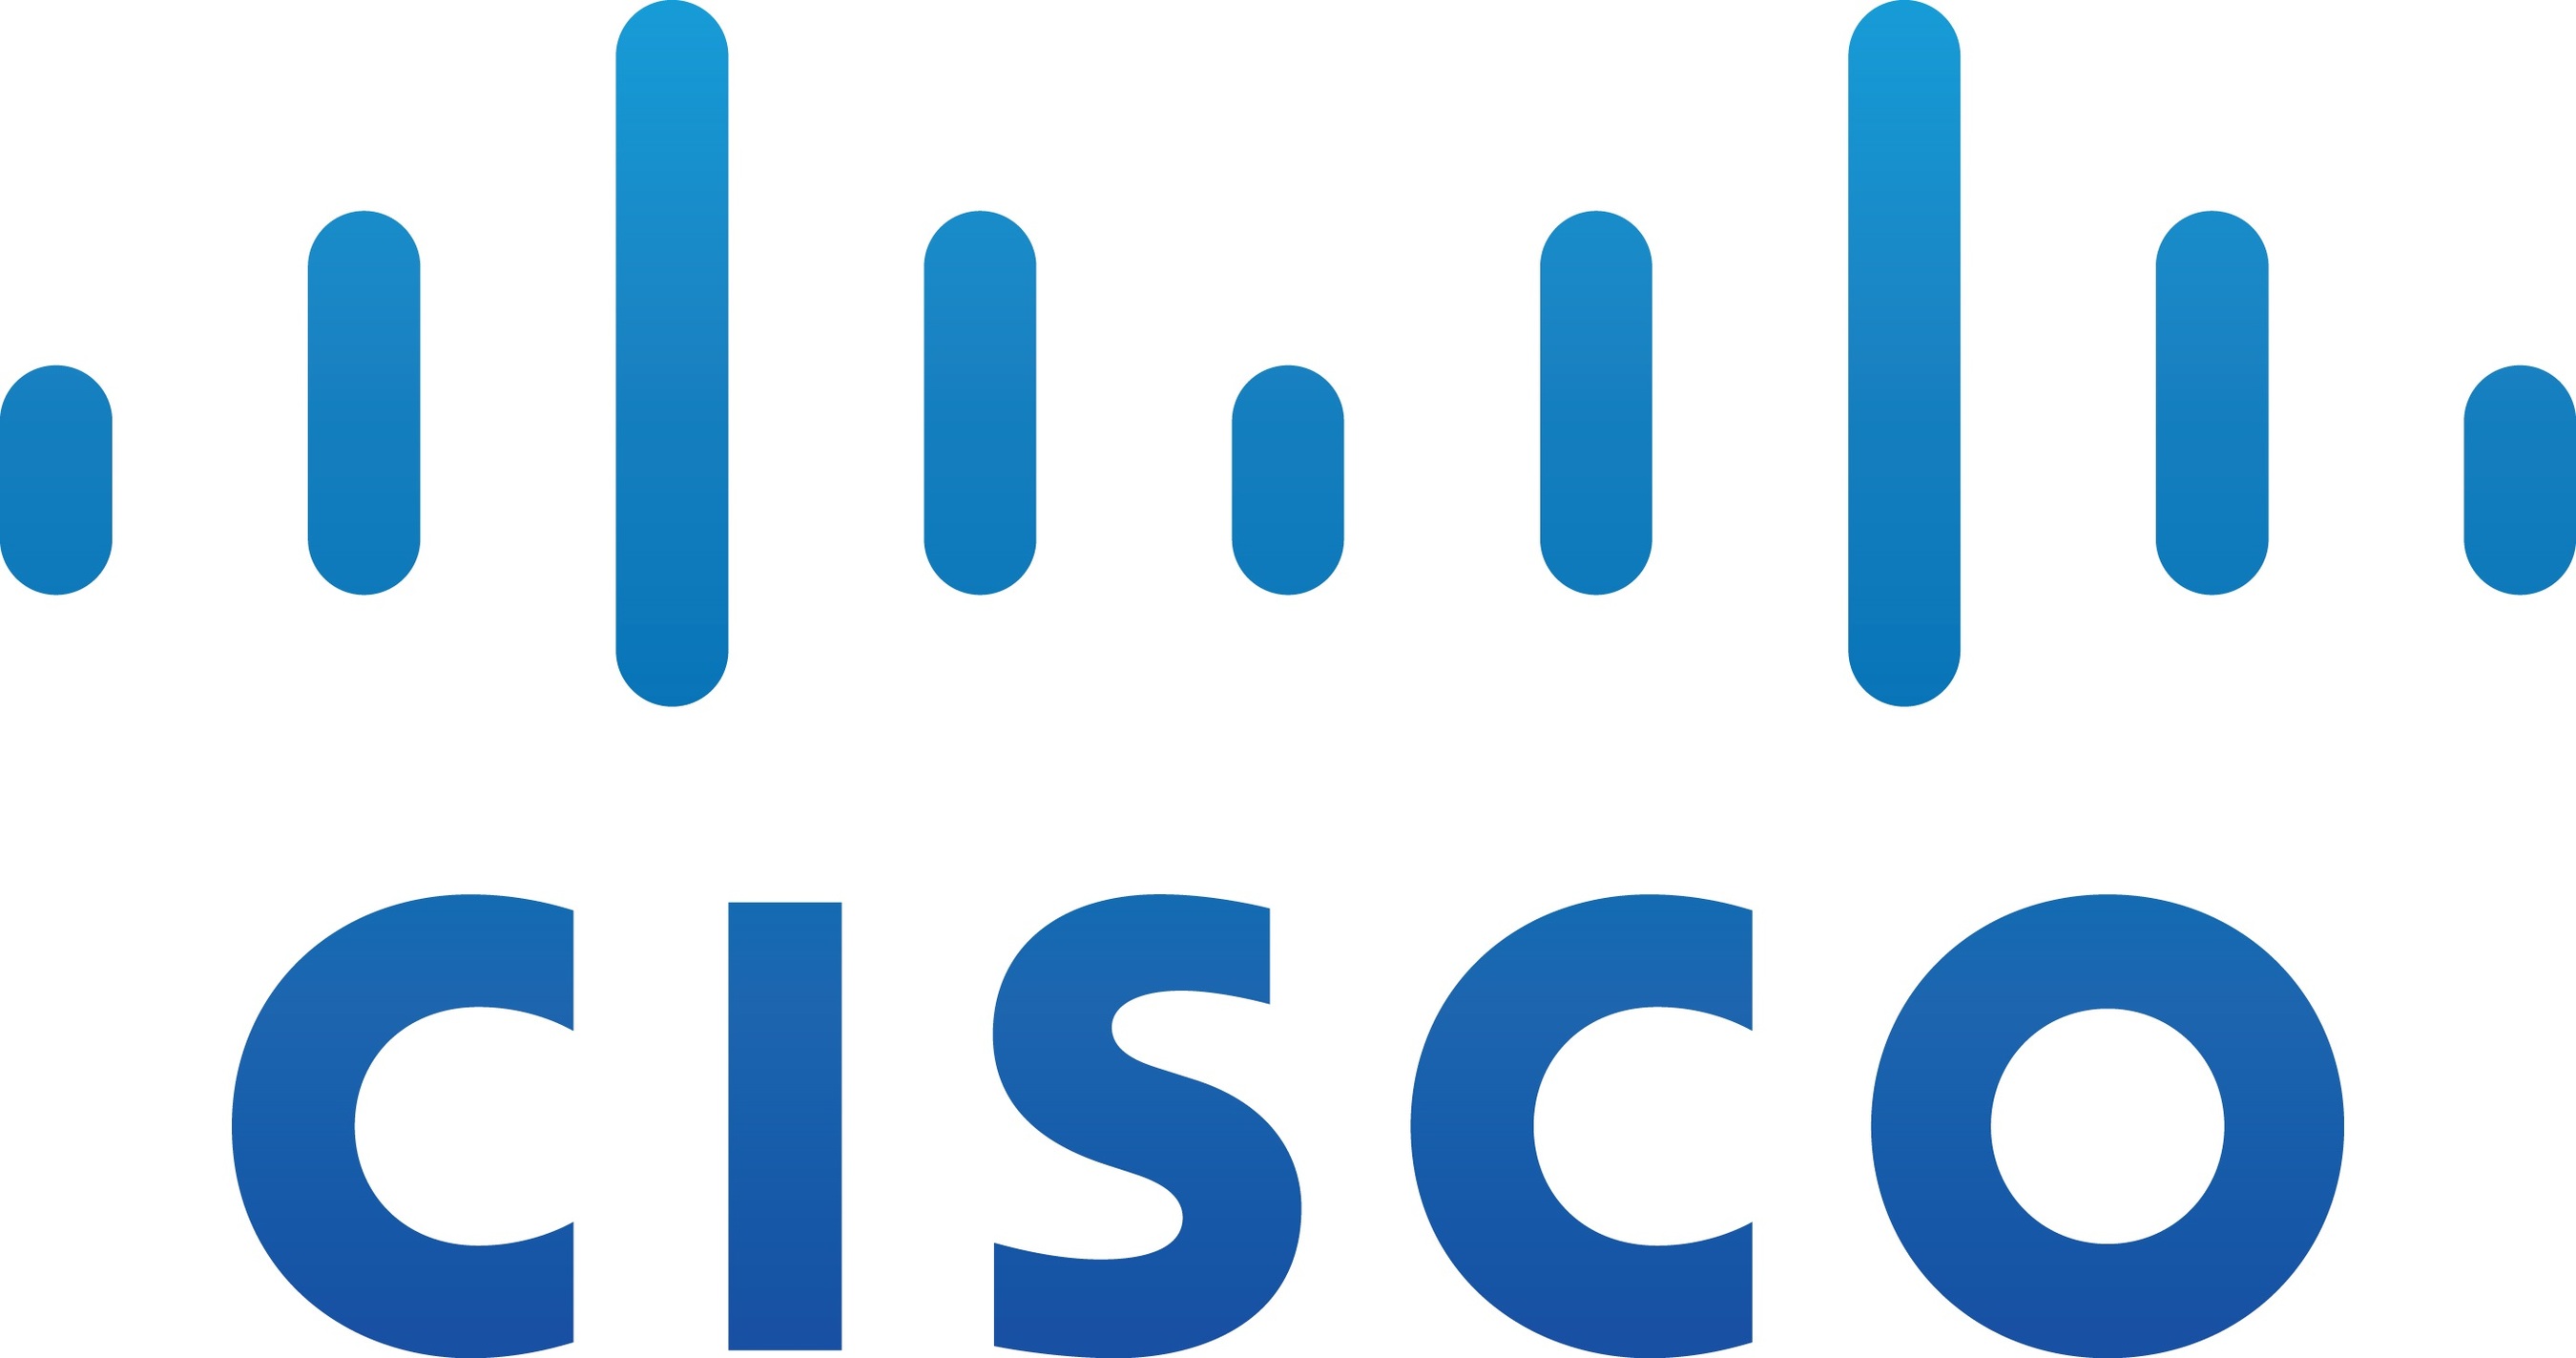 Cisco @ Mobile World Congress: Empowering Global Service Providers with AI-Ready Infrastructure to Win the Enterprise with Innovative Business Services